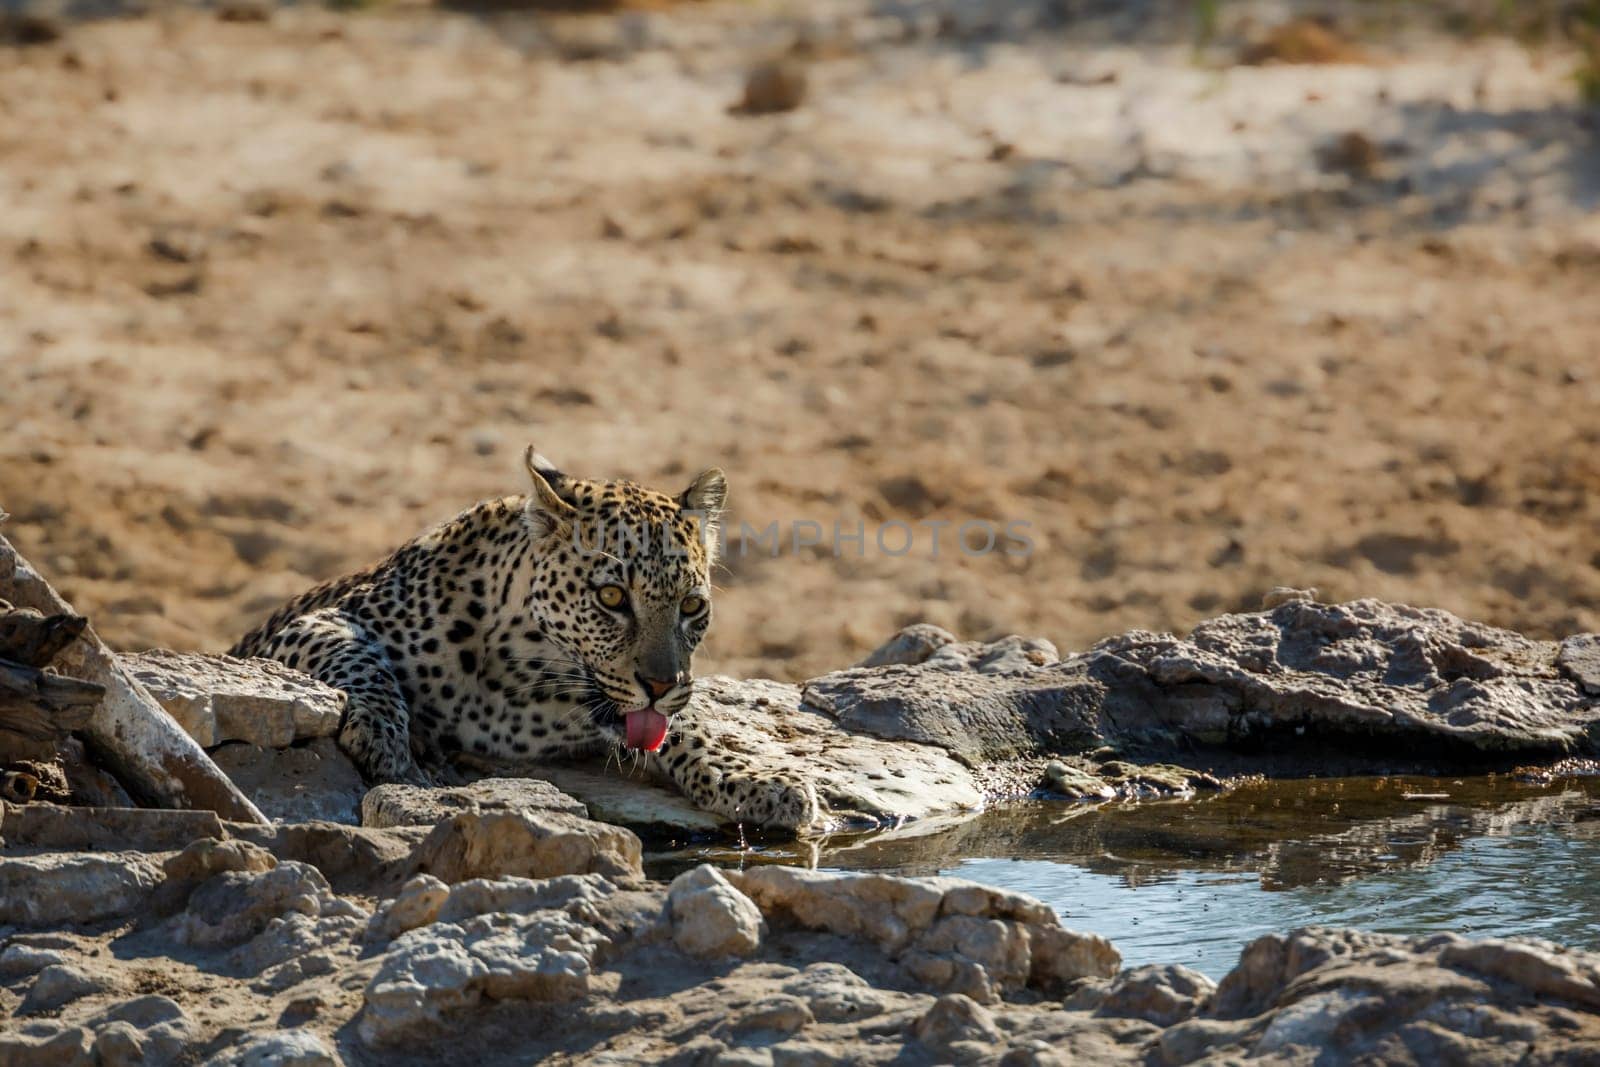 Leopard drinking at waterhole in Kgalagadi transfrontier park, South Africa; specie Panthera pardus family of Felidae